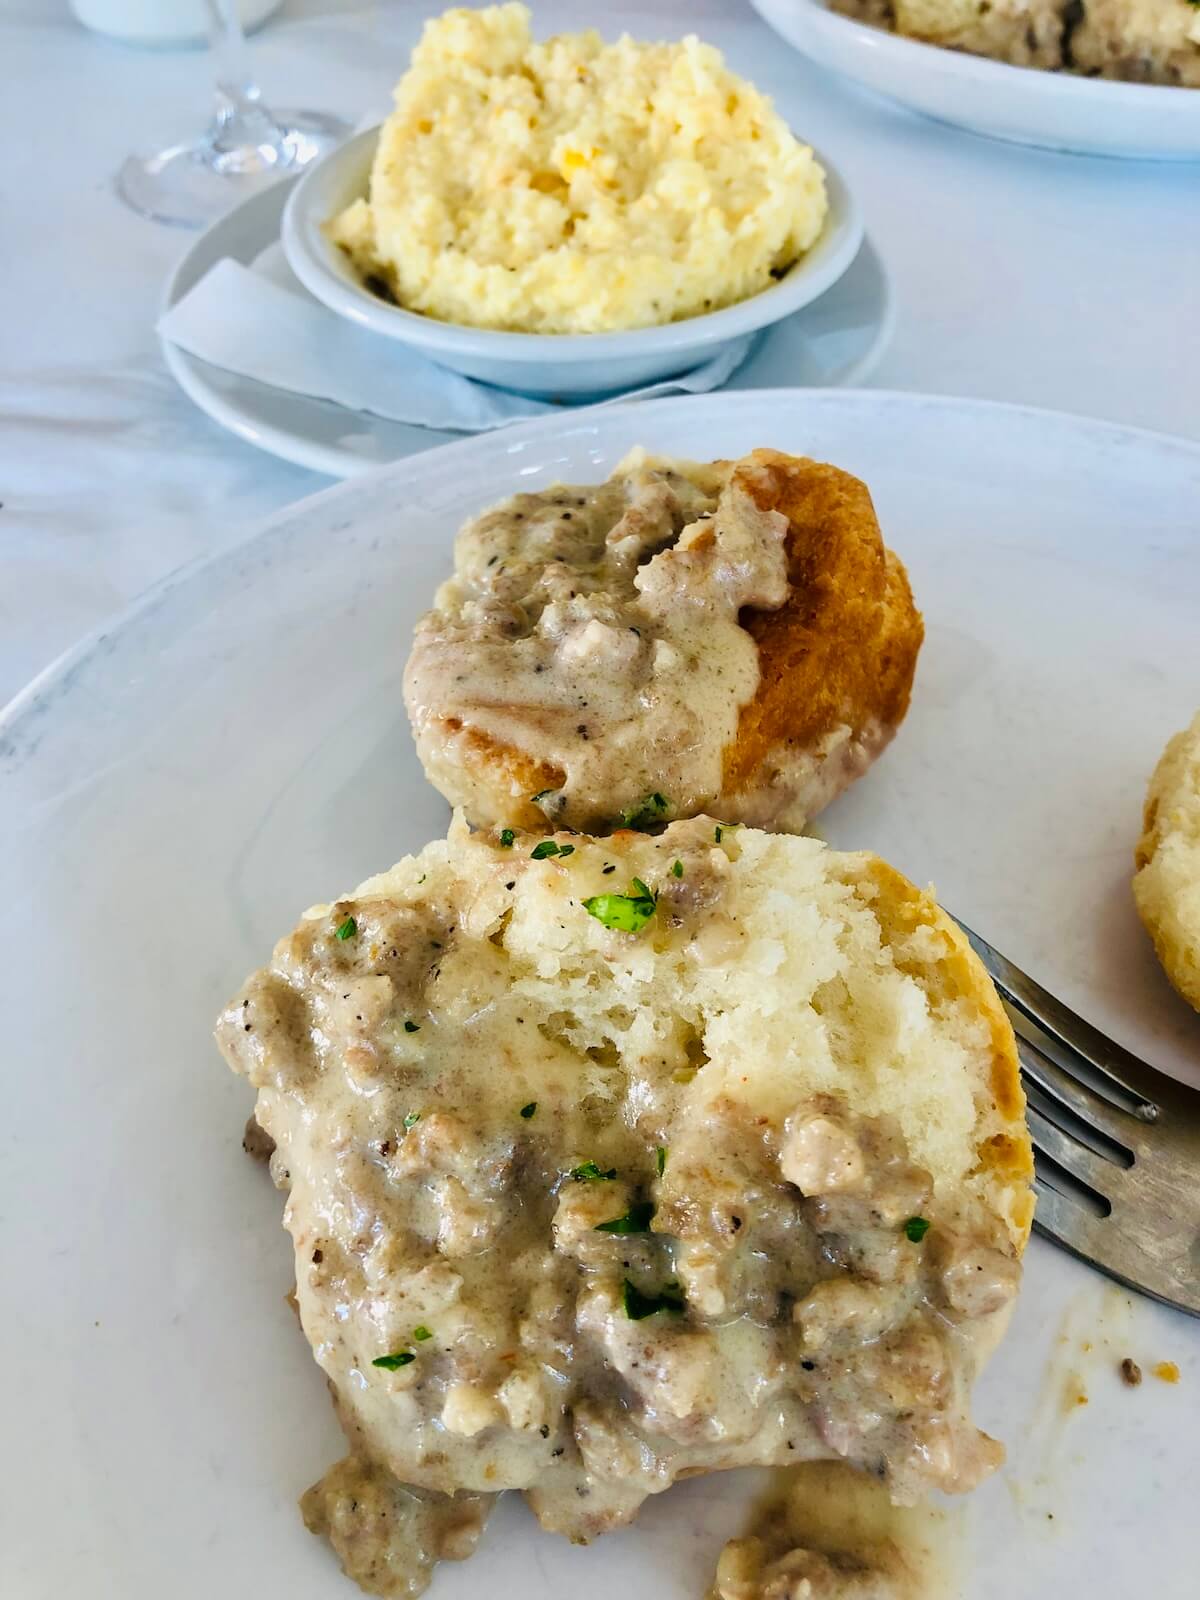 Biscuits and gravy great southern cafe 30a seaside florida